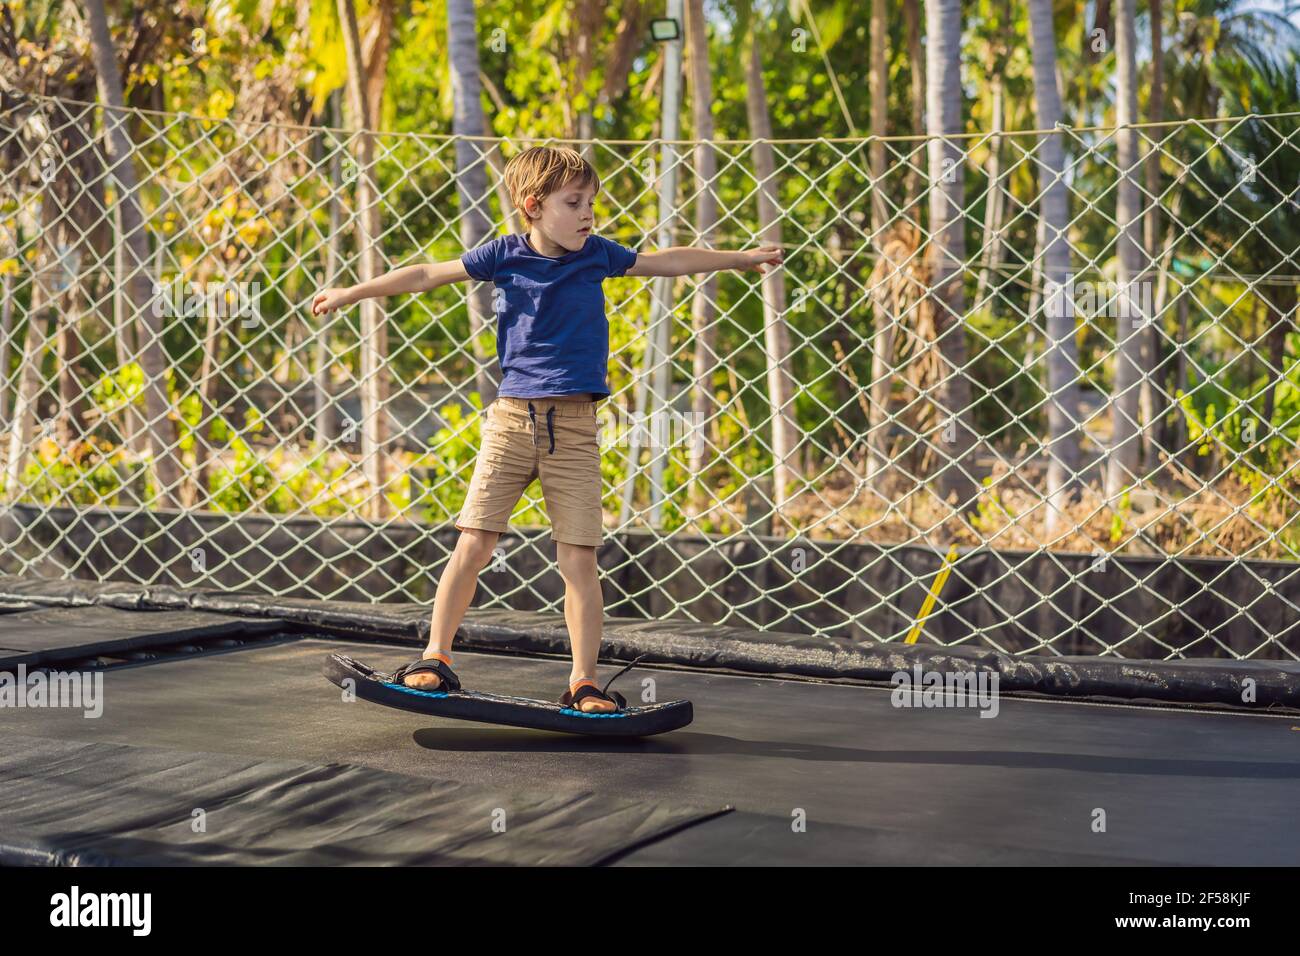 Happy boy on a soft board for a trampoline jumping on an outdoor trampoline, against the backdrop of palm trees. The trampoline board is like a Stock Photo